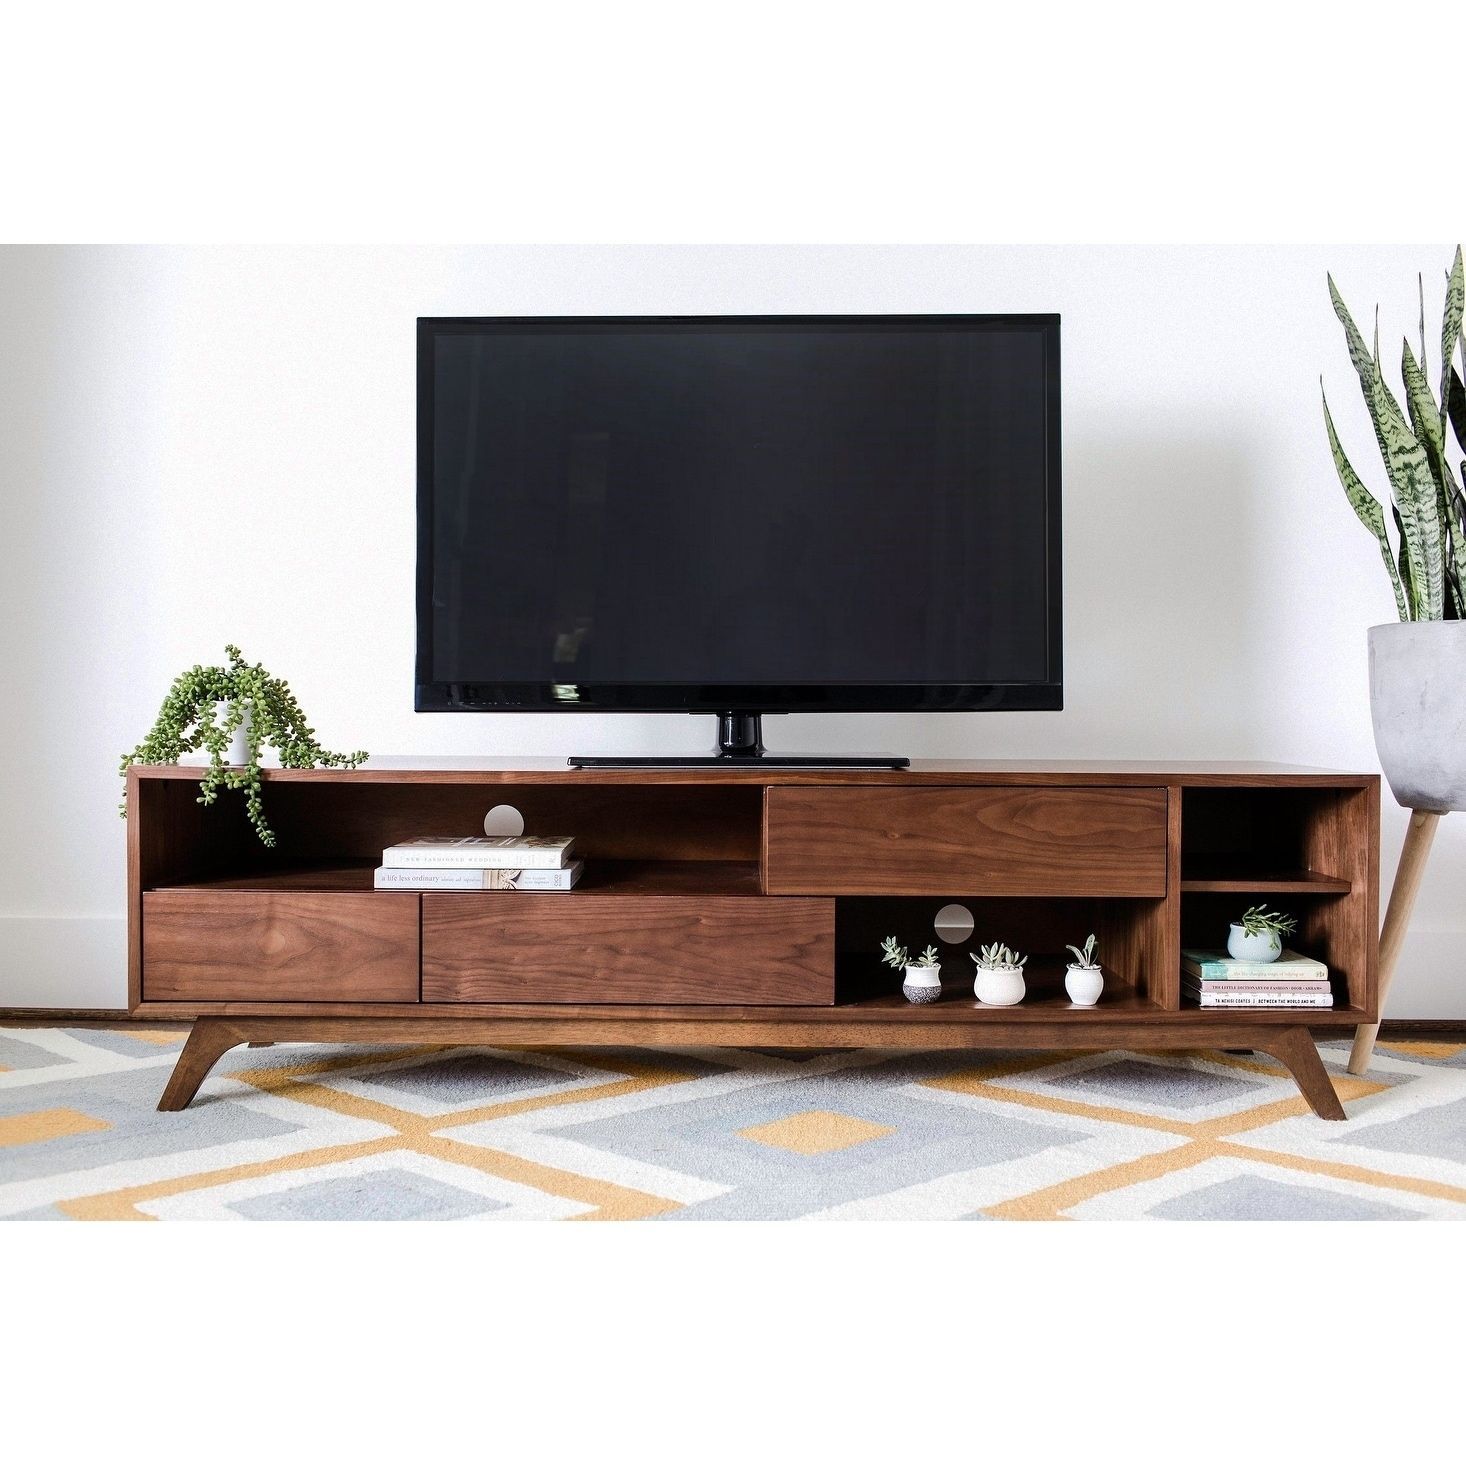 Beverly Mid Century Modern Tv Stand, Cabinet With Storage, Walnut, Bro With Regard To Mid Century Entertainment Centers (Gallery 20 of 20)